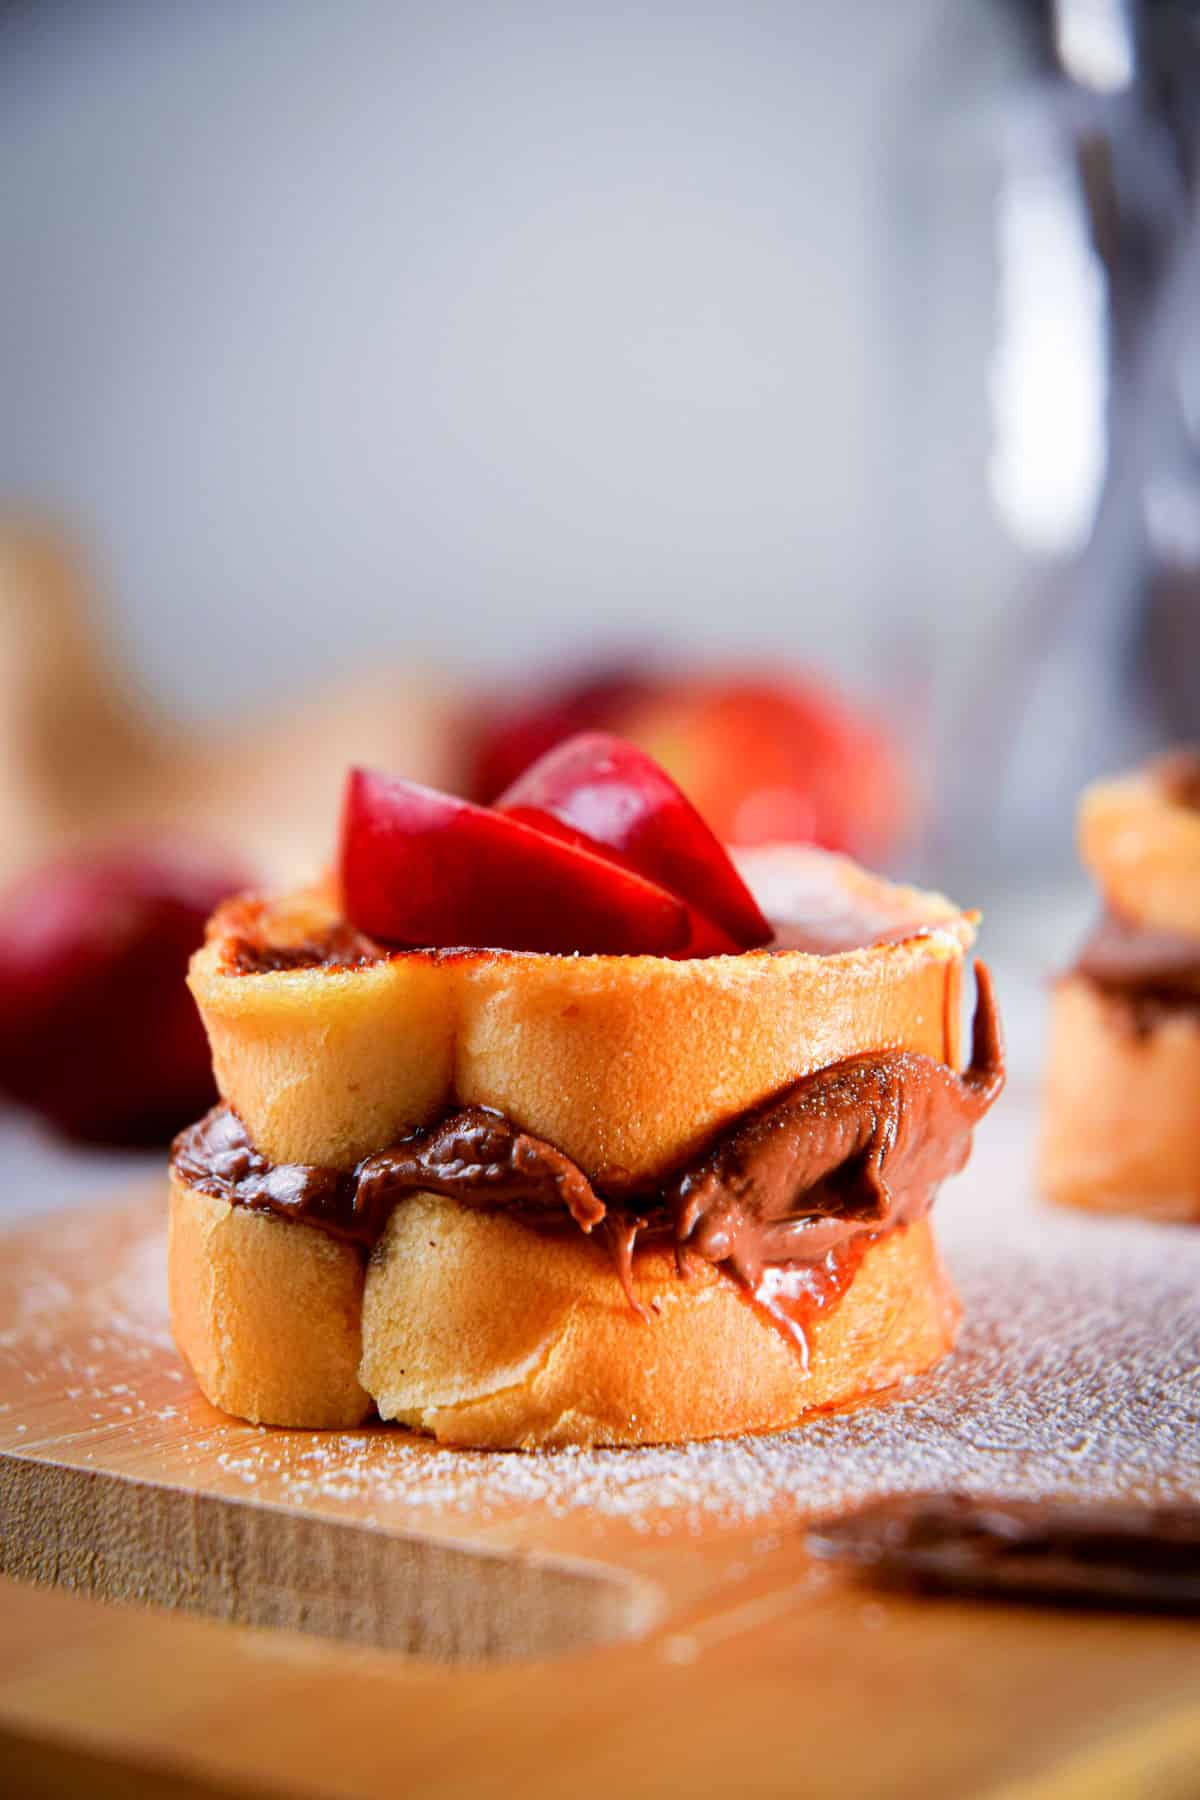 French toast stuffed with Nutella and topped with apples on cutting board.